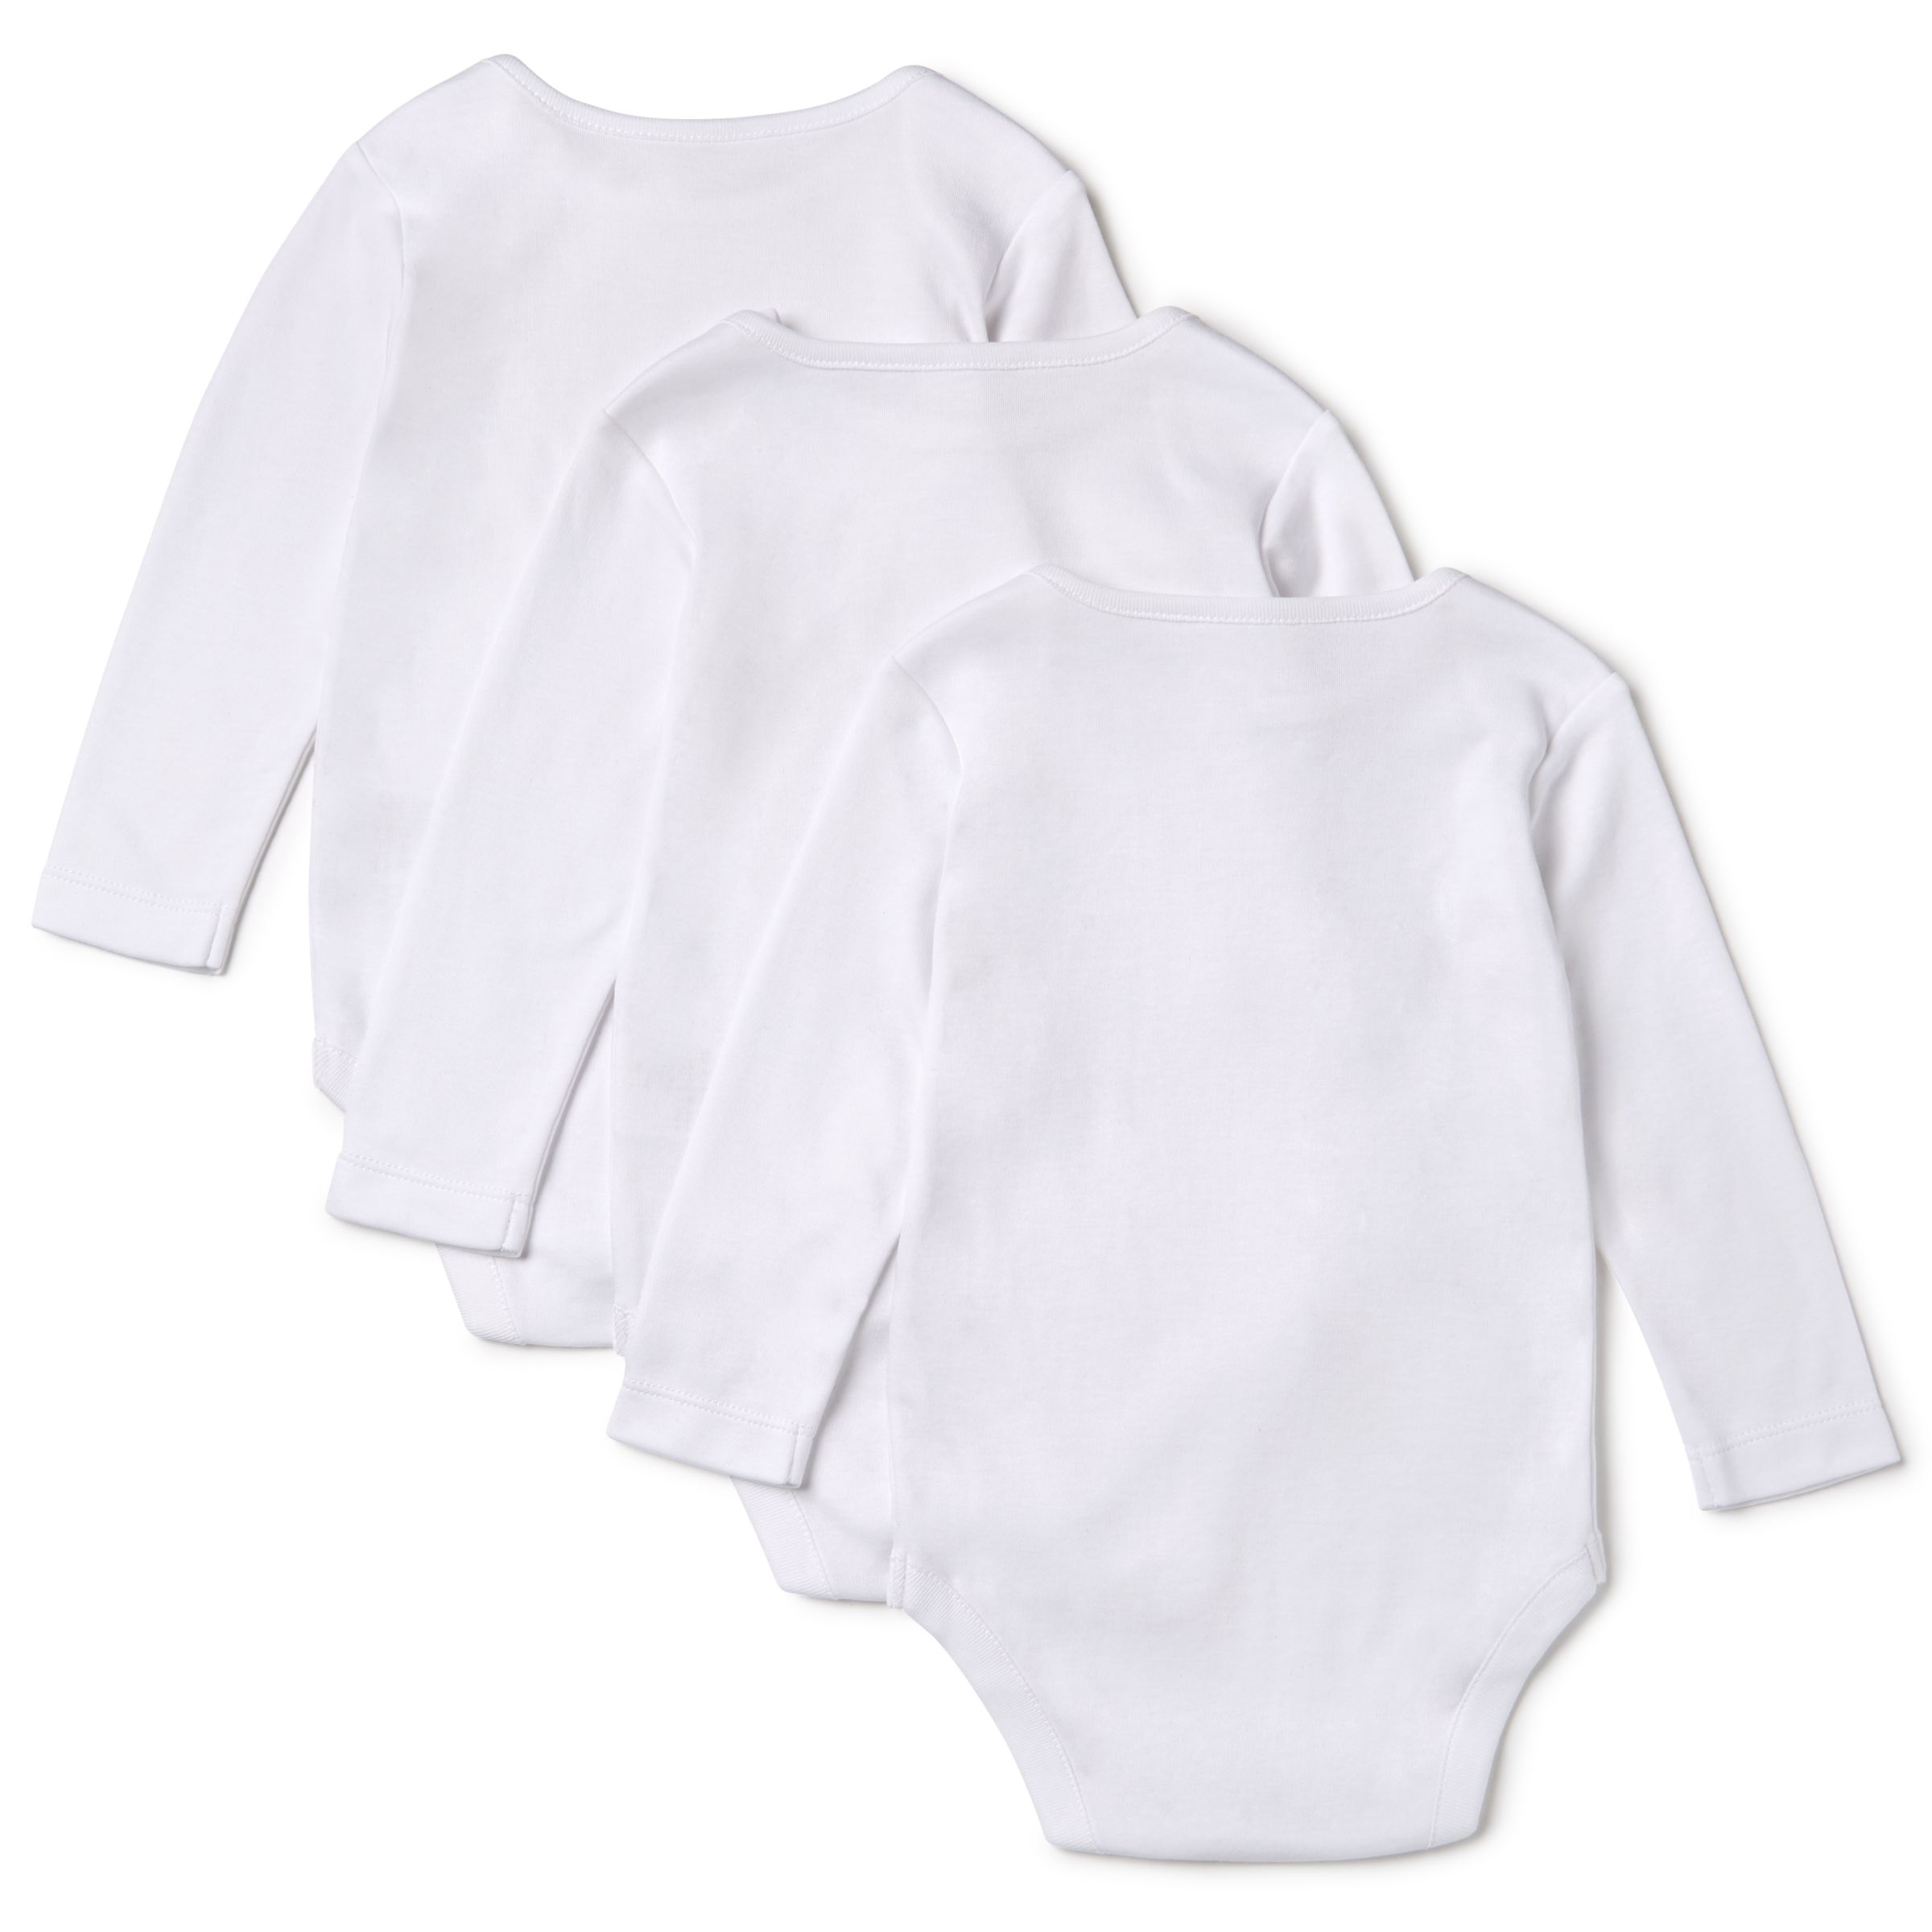 John Lewis Baby Pima Cotton Long Sleeve Bodysuit, Pack of 3, White, Early baby